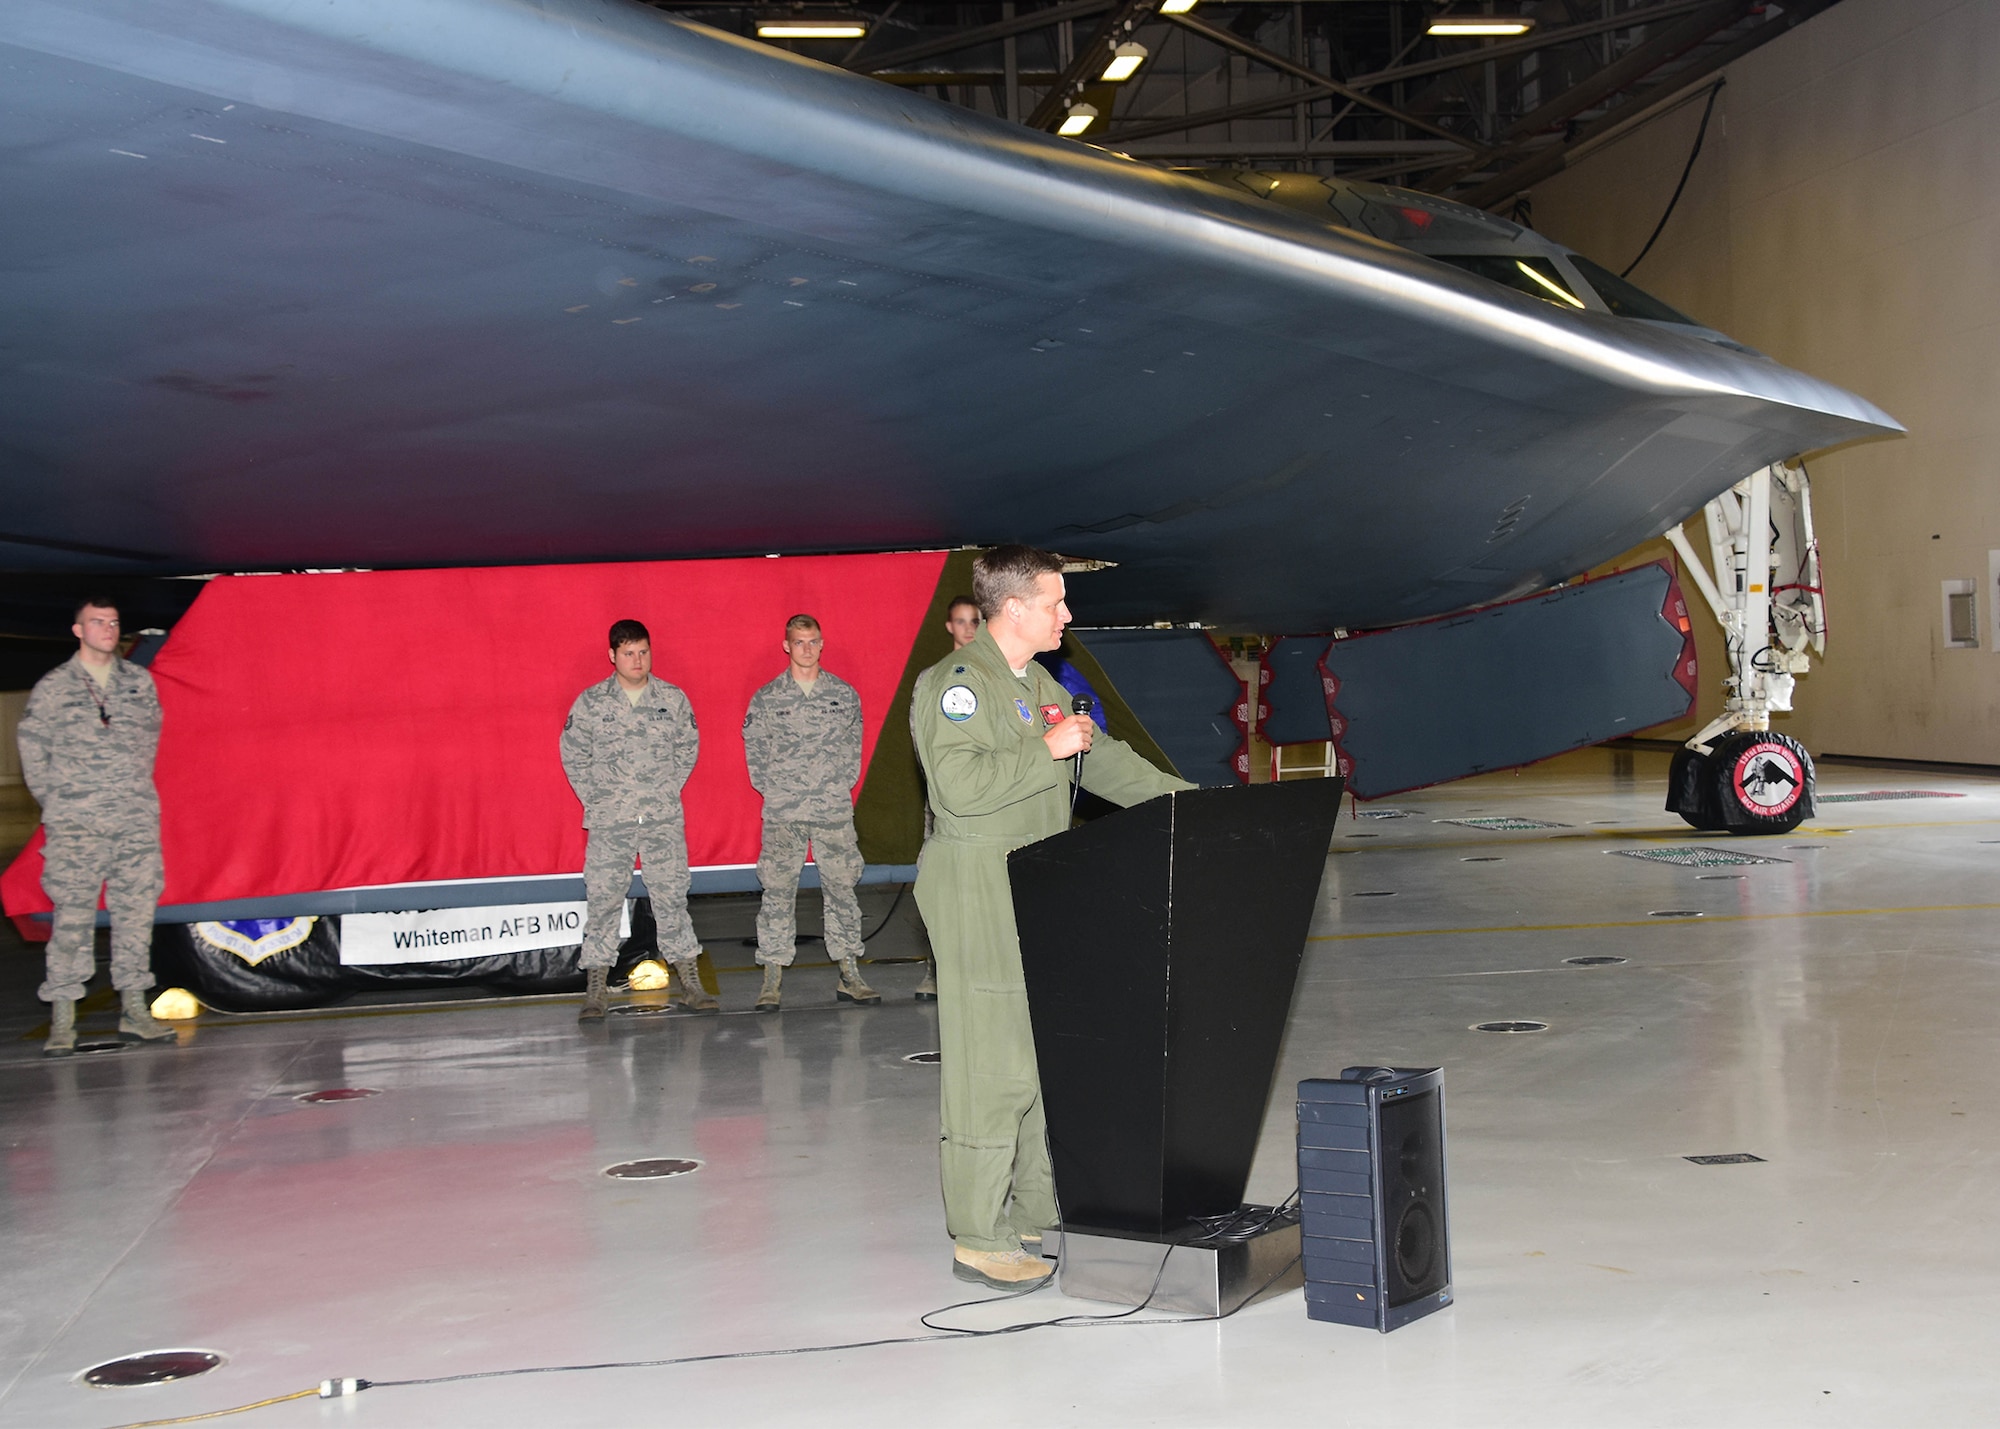 Lt. Col. Timothy Rezac, commander of the 110th Bomb Squadron, a subordinate unit of the Missouri Air National Guard’s 131st Bomb Wing, addresses the audience prior to the unveiling of a new paint scheme with the slogan “Lindbergh’s Own” on a gear door for the Spirit of Nebraska, a B-2 bomber, at Whiteman Air Force Base, Missouri, Aug. 4, 2018. The slogan commemorates the late Charles A. Lindbergh, the unit’s most famous member. (U.S. Air National Guard photo by Senior Master Sgt. Mary Dale Amison)